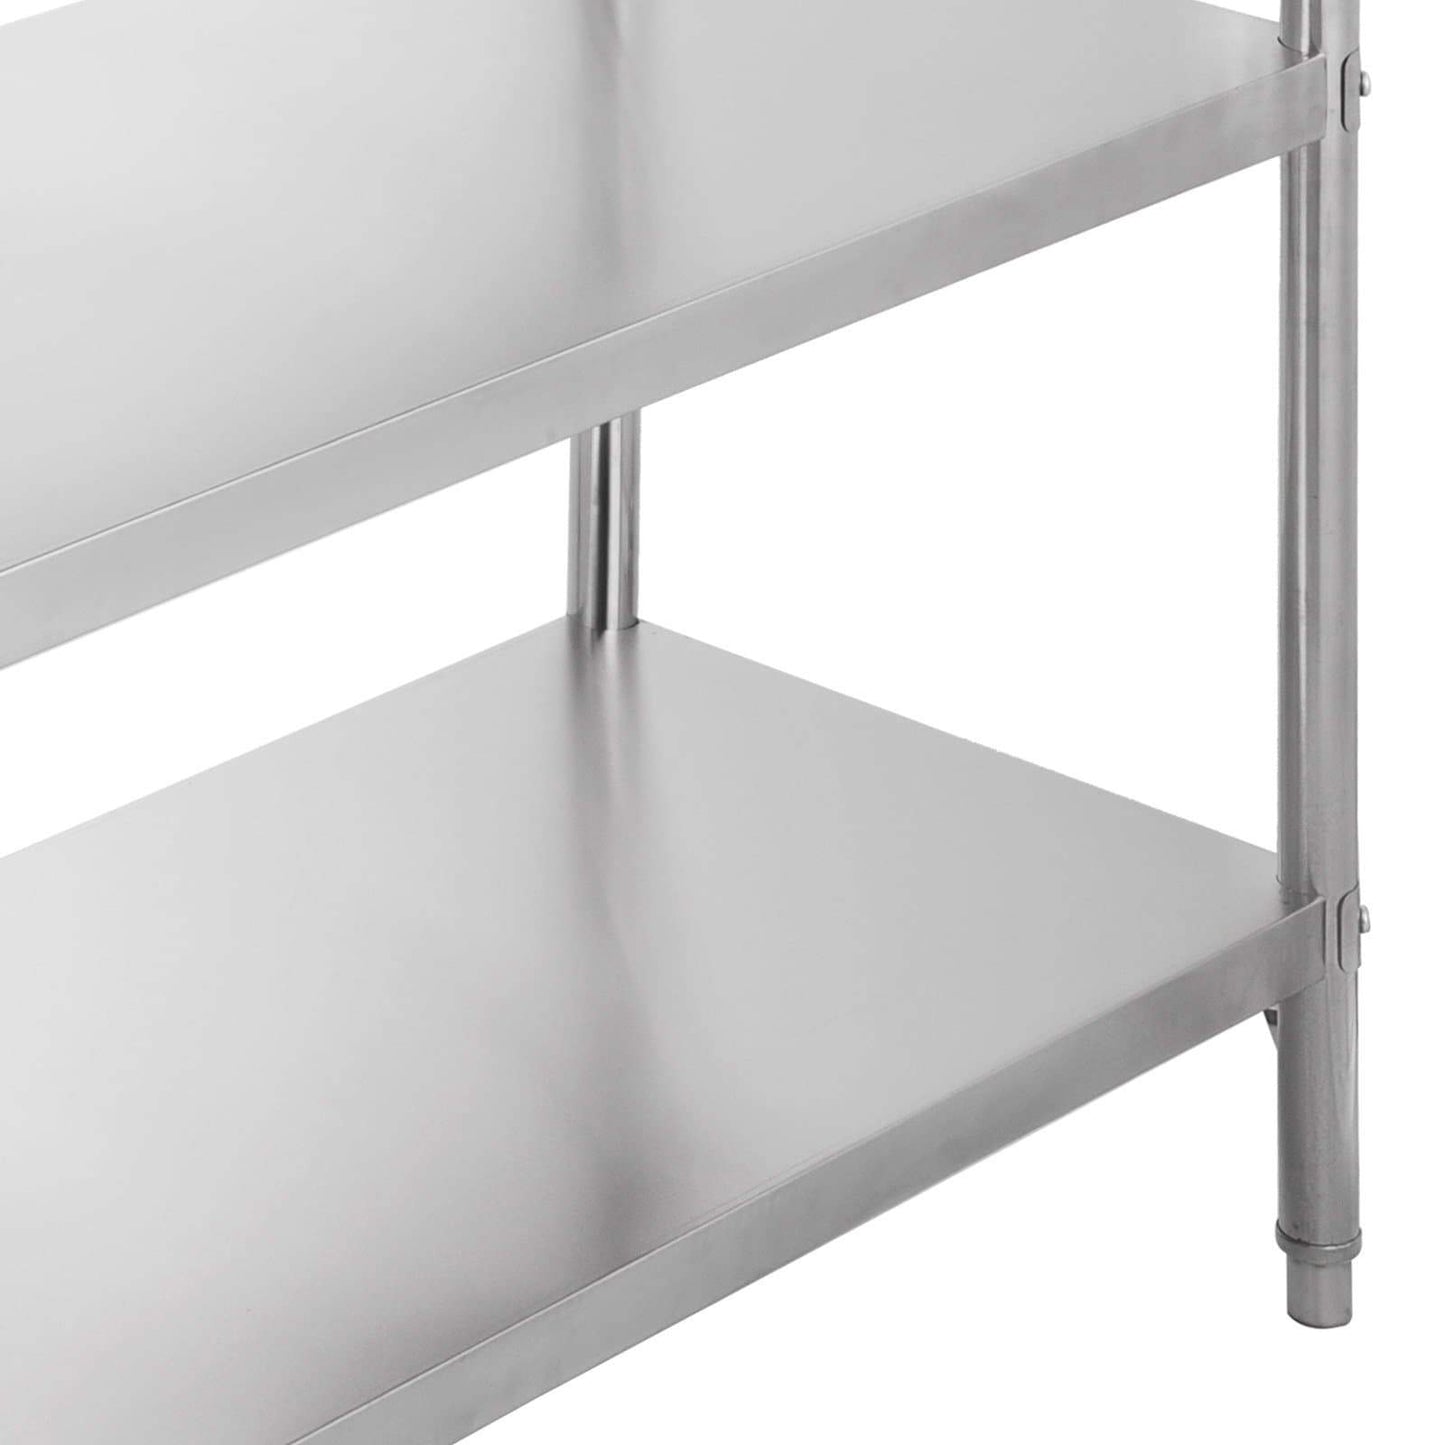 Best happybuy stainless steel shelving units heavy duty 4 tier shelving units and storage shelf unit for kitchen commercial office garage storage 4 tier 400lb per shelf